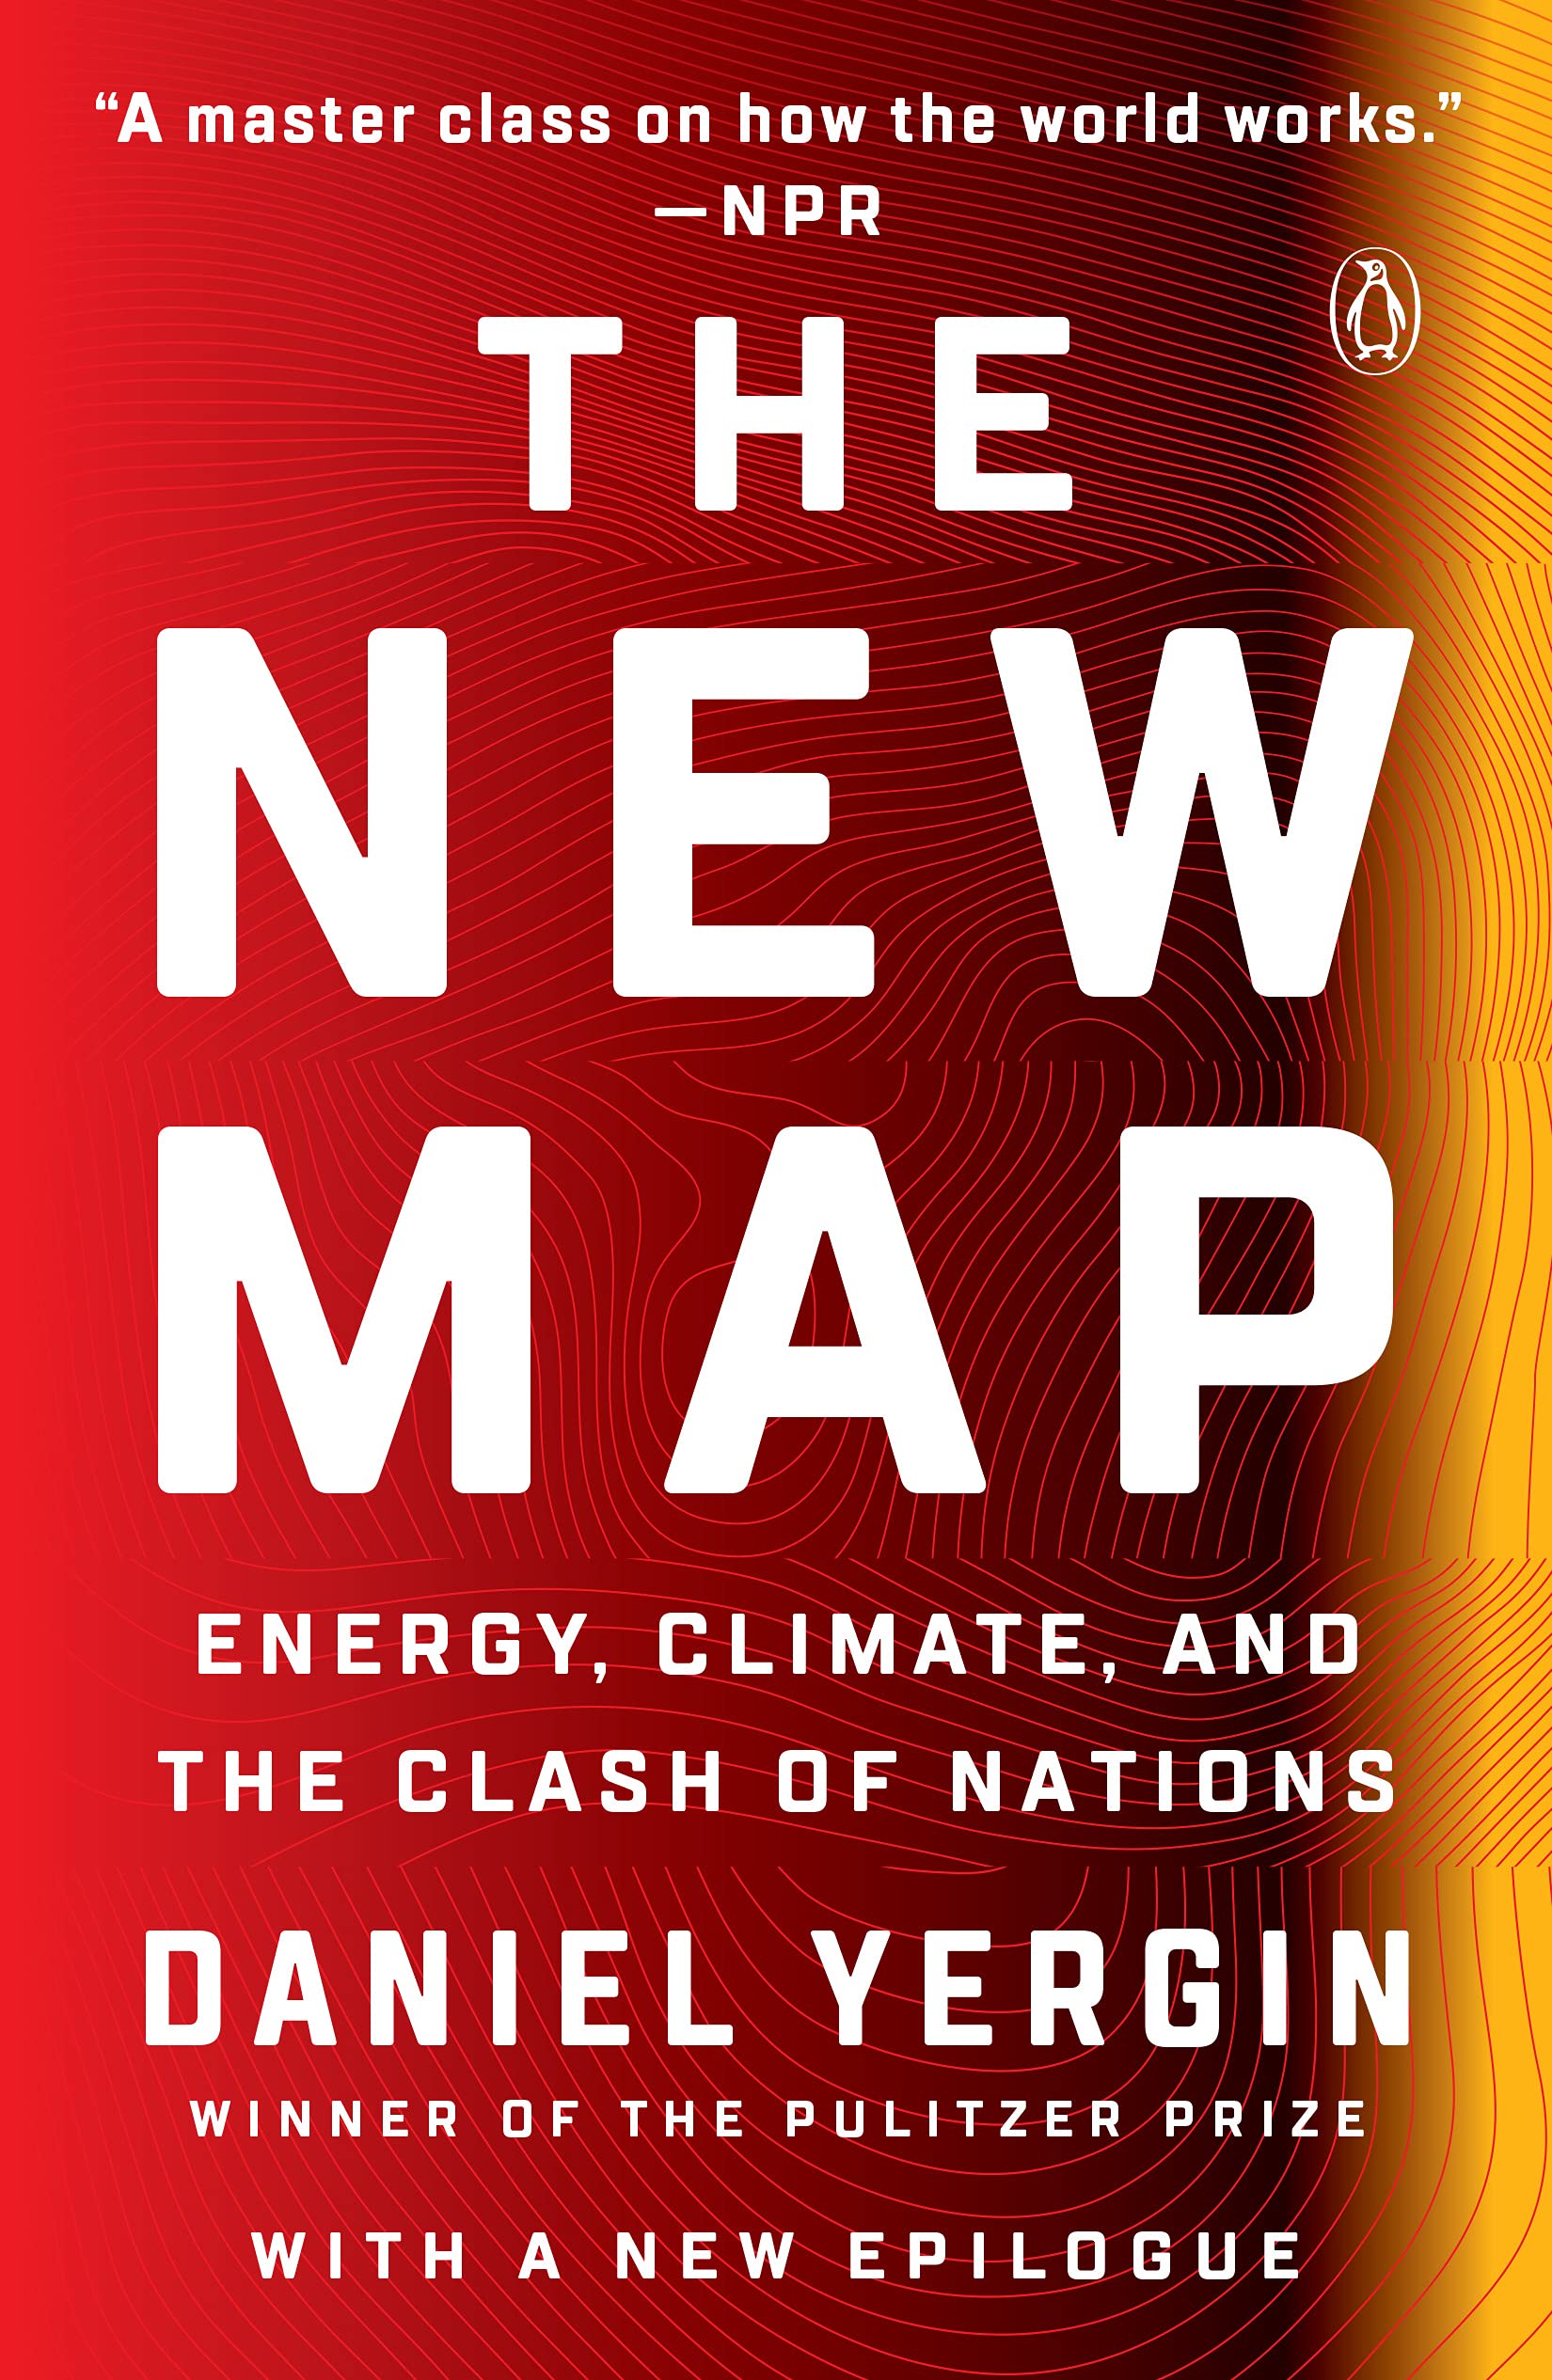 The New Map: Energy, Climate, and the Clash of Nations (eBook) by Daniel Yergin $1.99